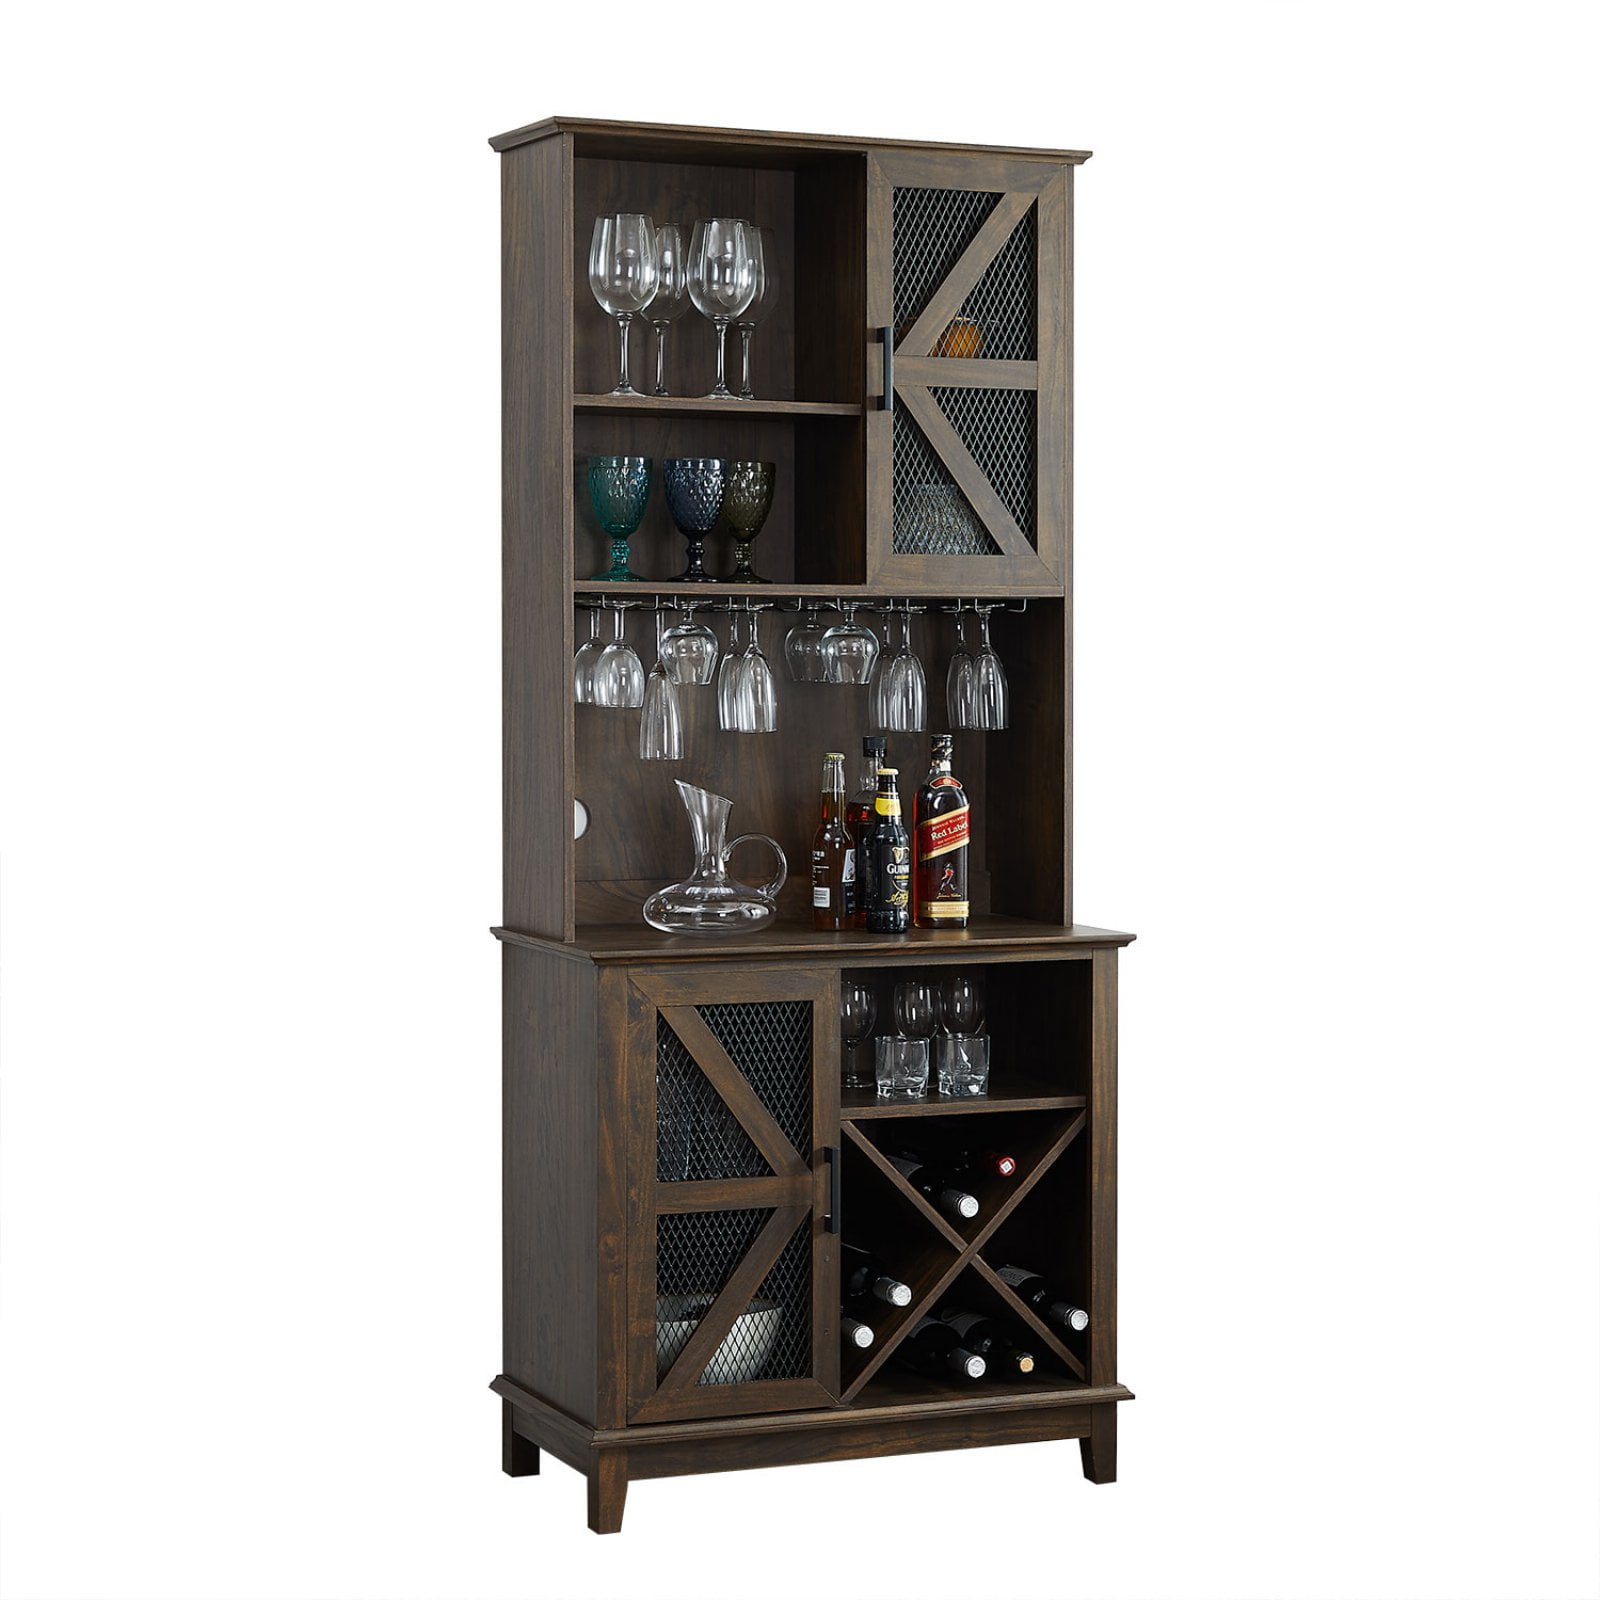 Storage Cabinets 3 Shelves and a 15 Wine Glass Rack with a Modern Dark Weathered Oak Finish TUHOME Montenegro Collection Bar Cabinet//Home Bar Comes with a 5 Bottle Wine Rack